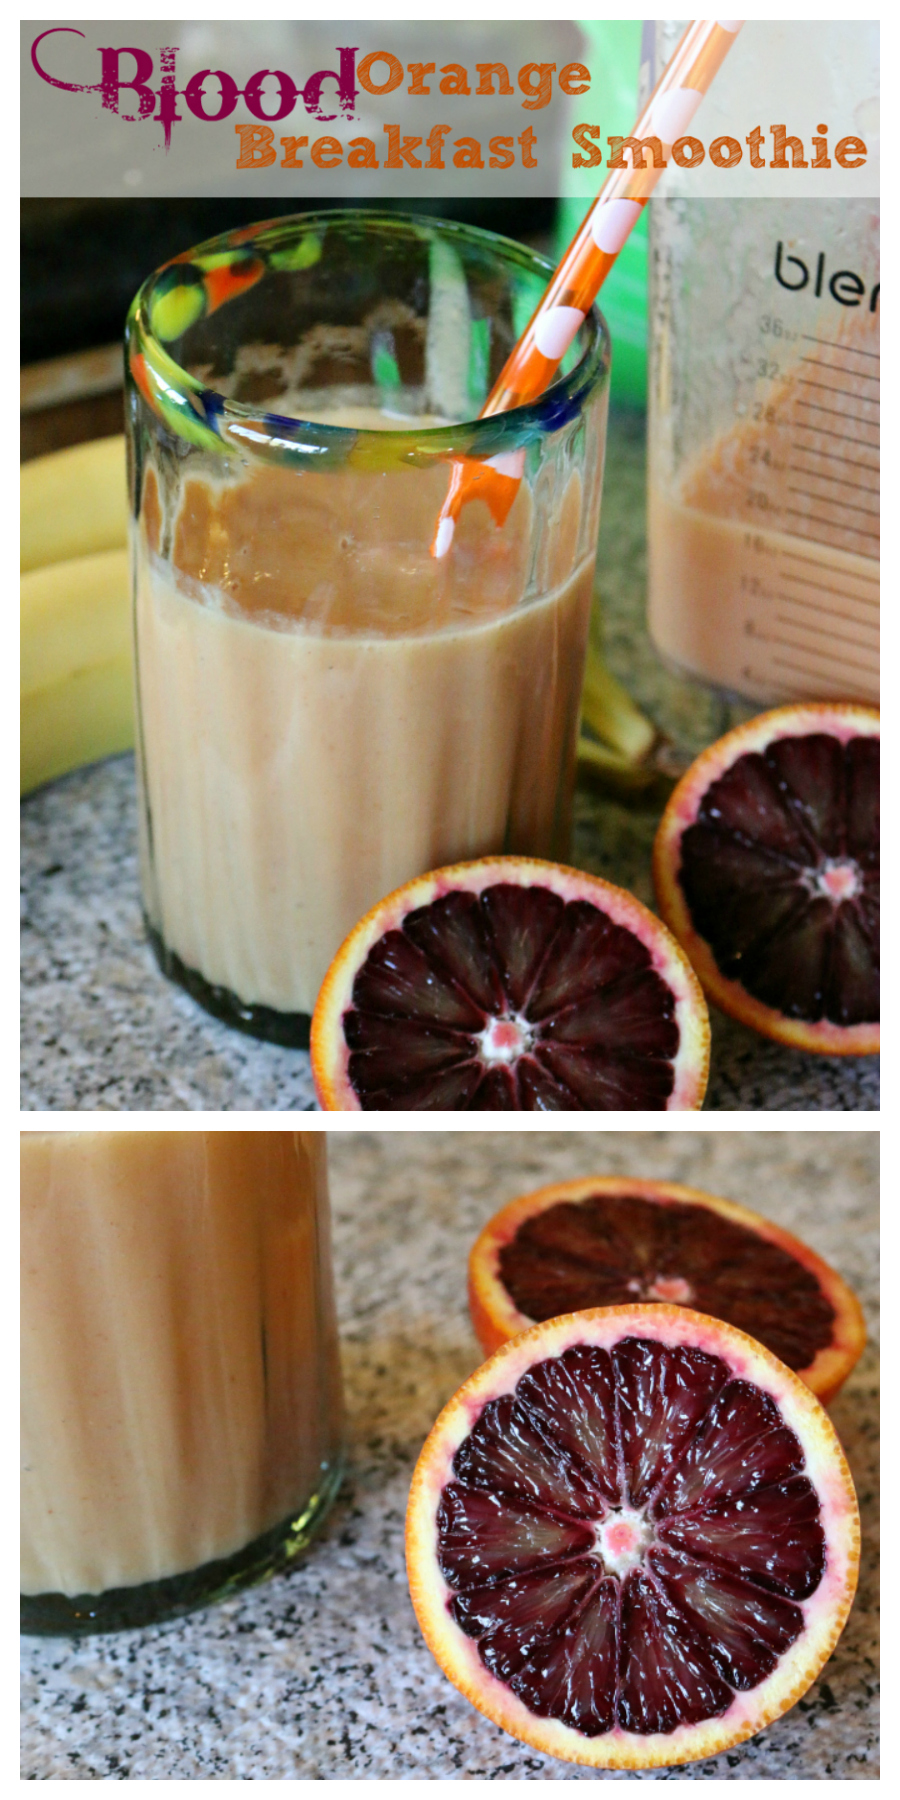 Blood Orange Breakfast Smoothie | This is a seasonal recipe from CeceliasGoodStuff.com | Good Food for Good People